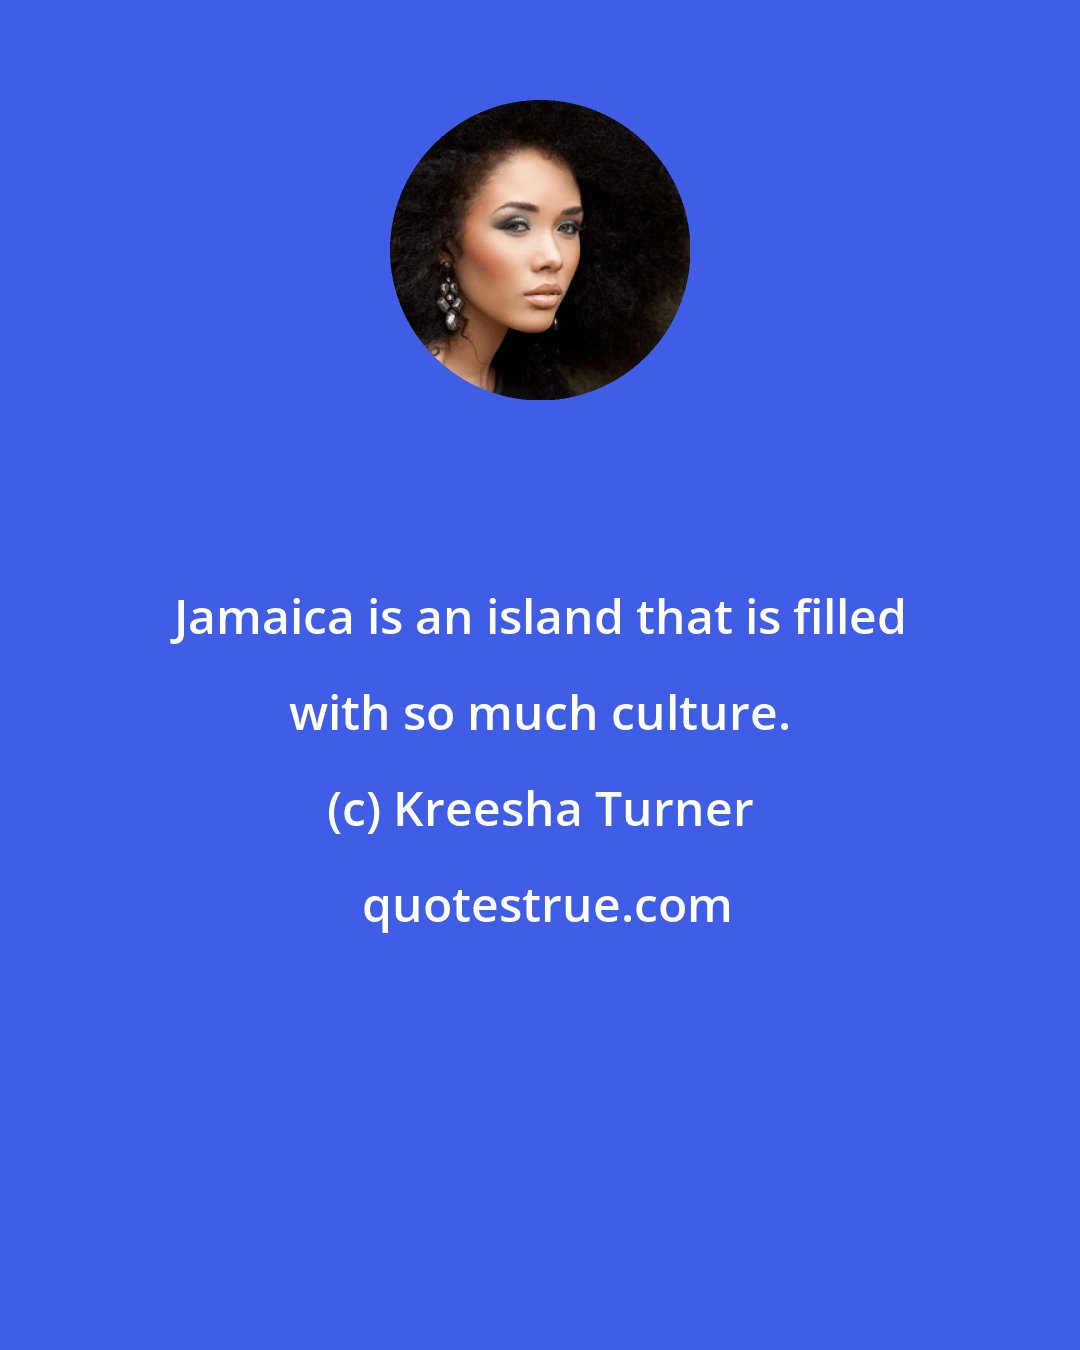 Kreesha Turner: Jamaica is an island that is filled with so much culture.